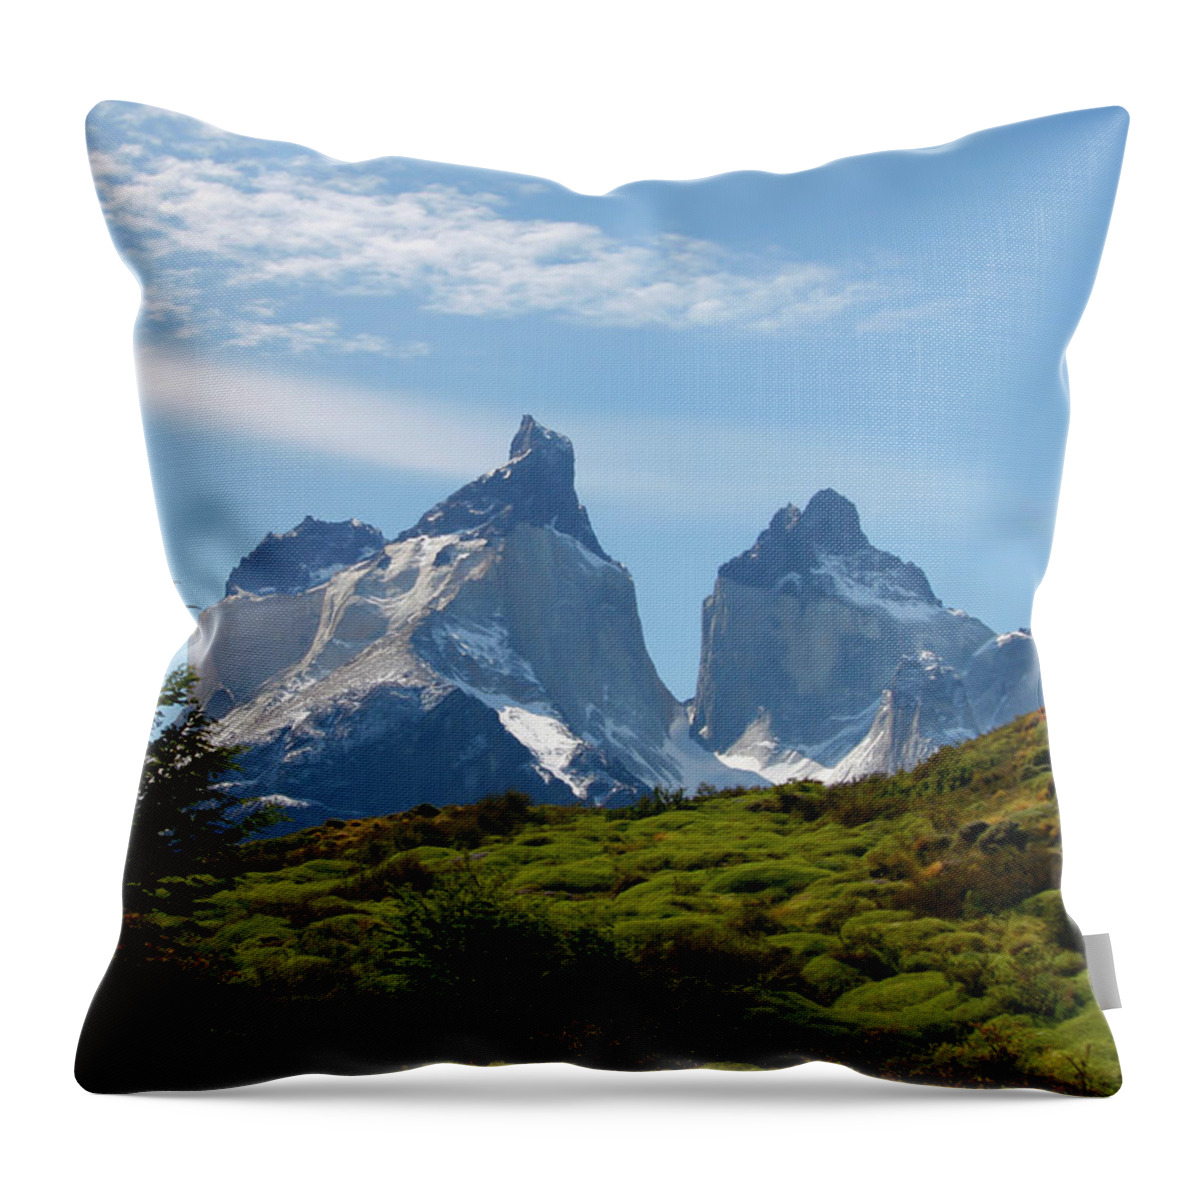 Majestic Throw Pillow featuring the photograph Torres Del Paigne Mountains Chile #1 by Doug88888